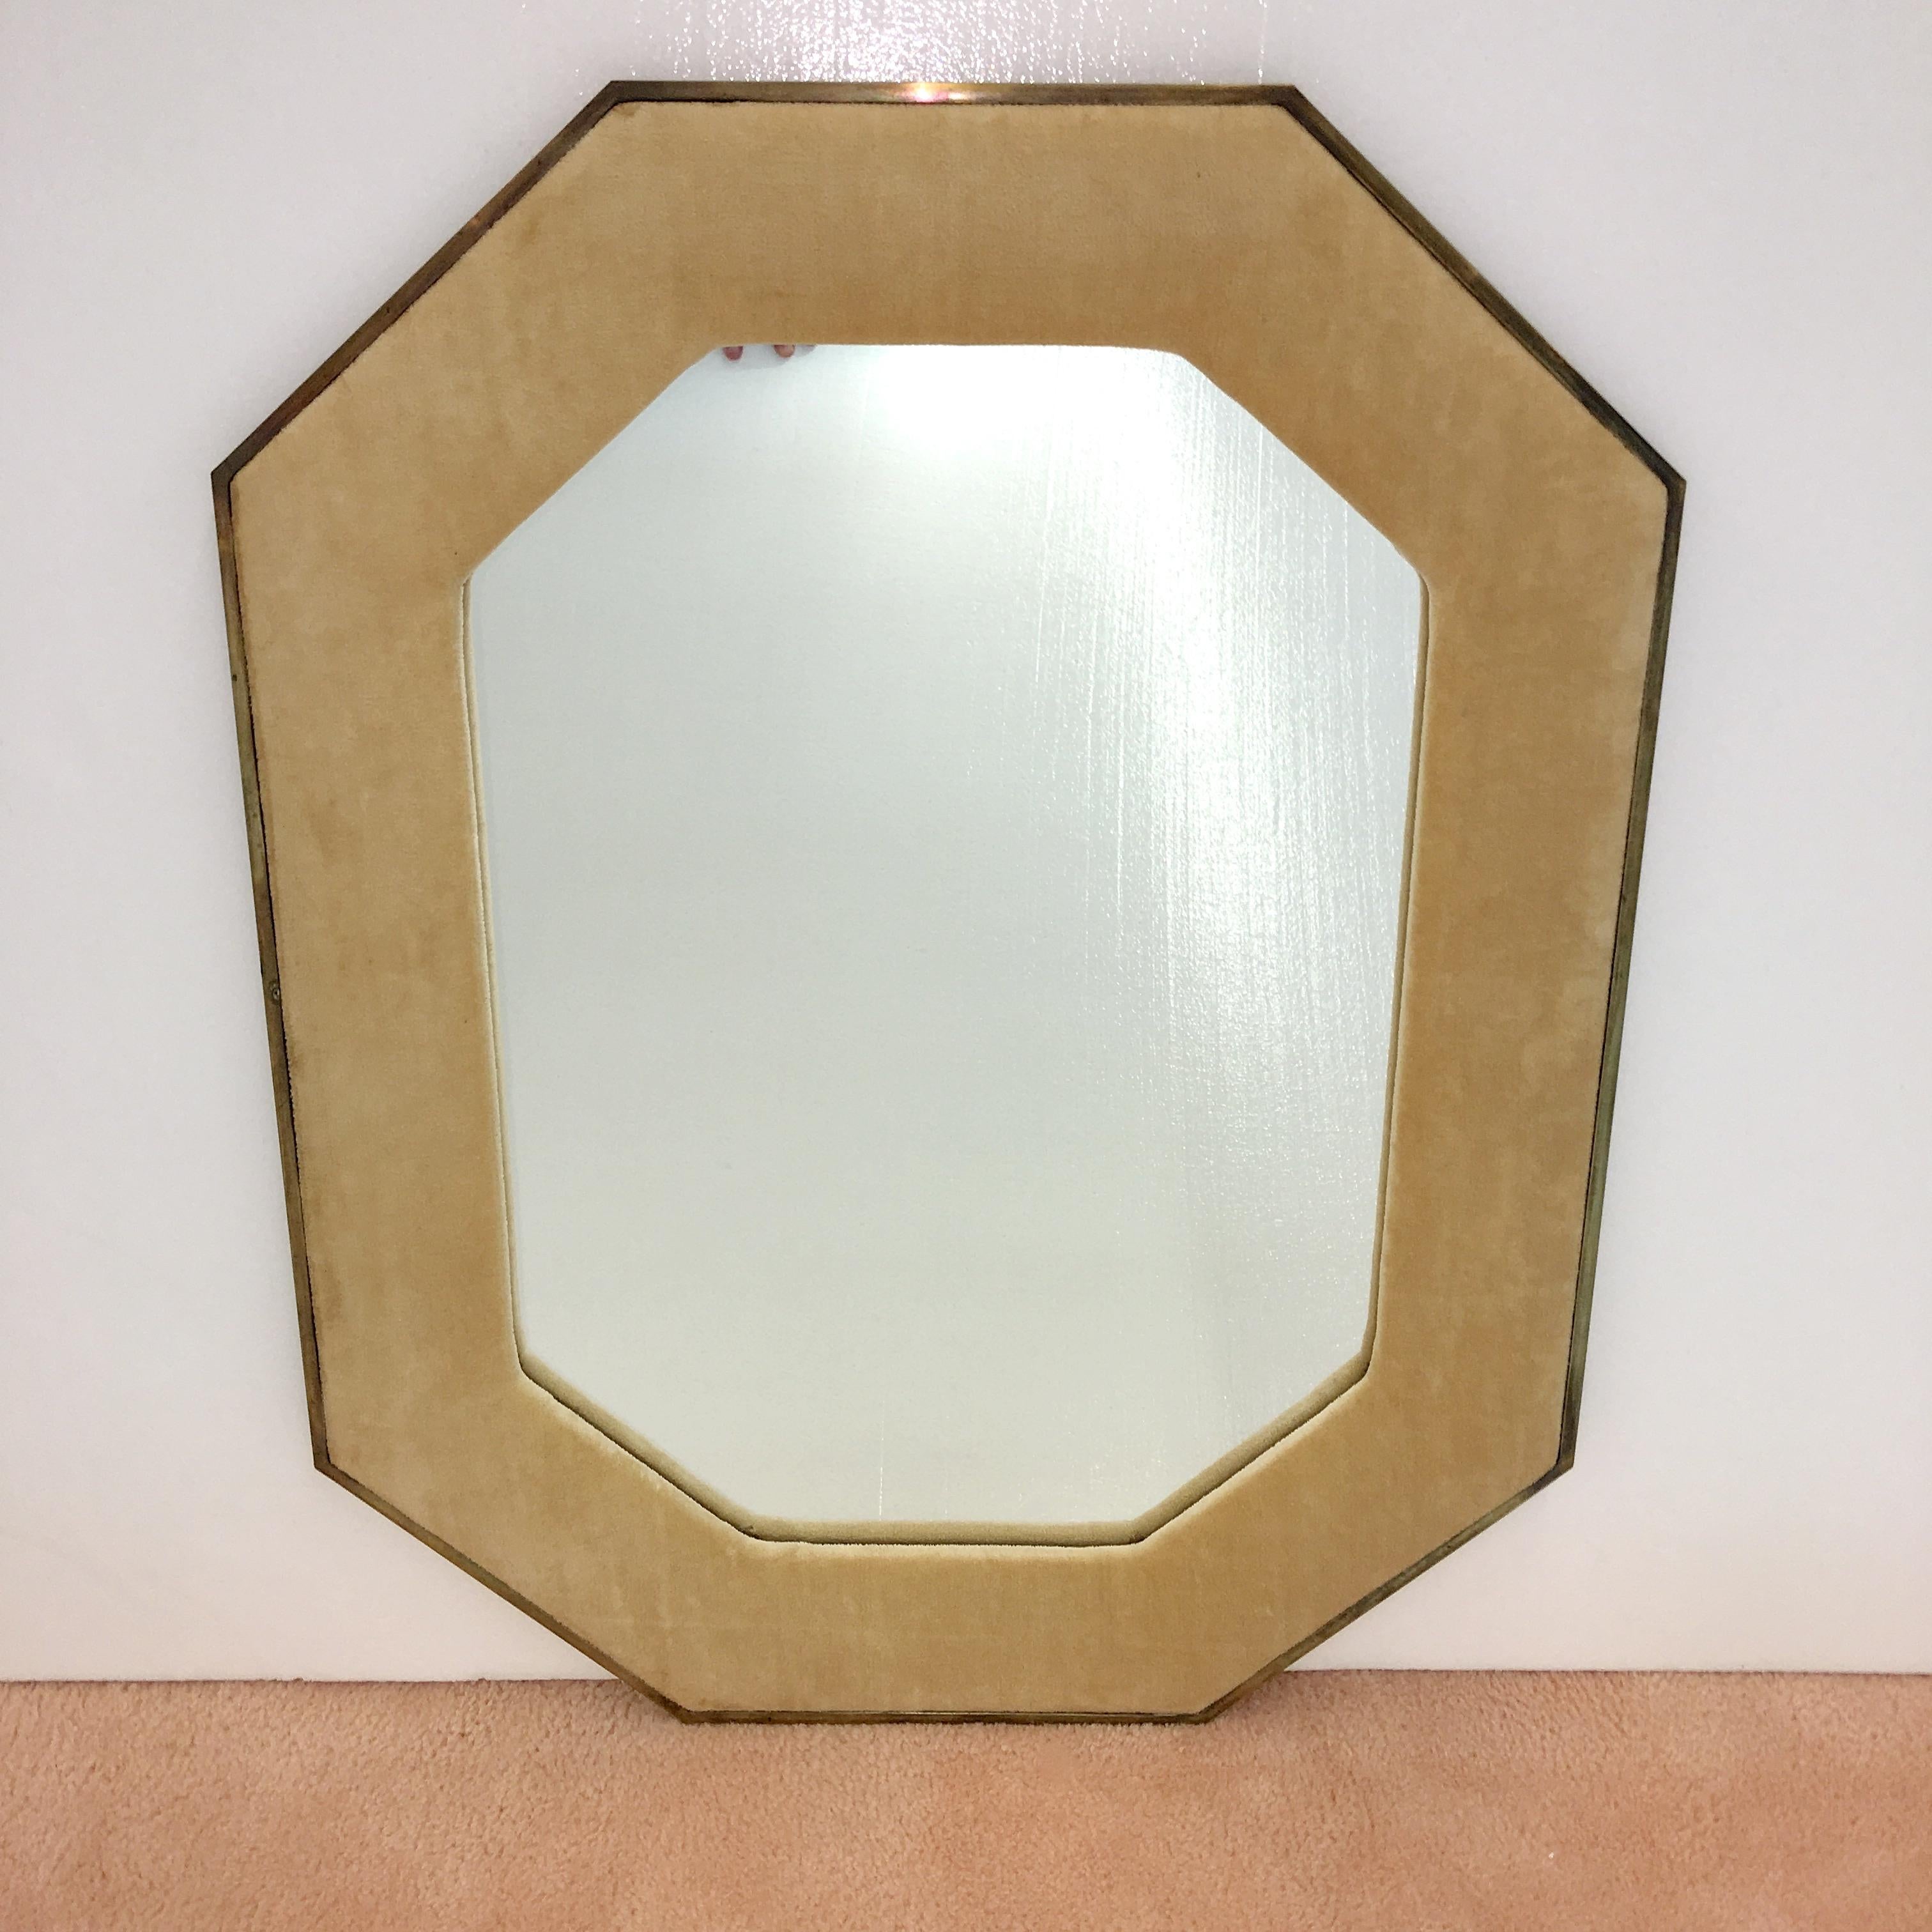 High quality octagonal shaped mirror produced in 1960 by John Widdicomb for John Stuart.

Outer frame is slim solid brass with upholstered 4 inch inner border. Currently in its original beige chenille however it can be recovered in your own